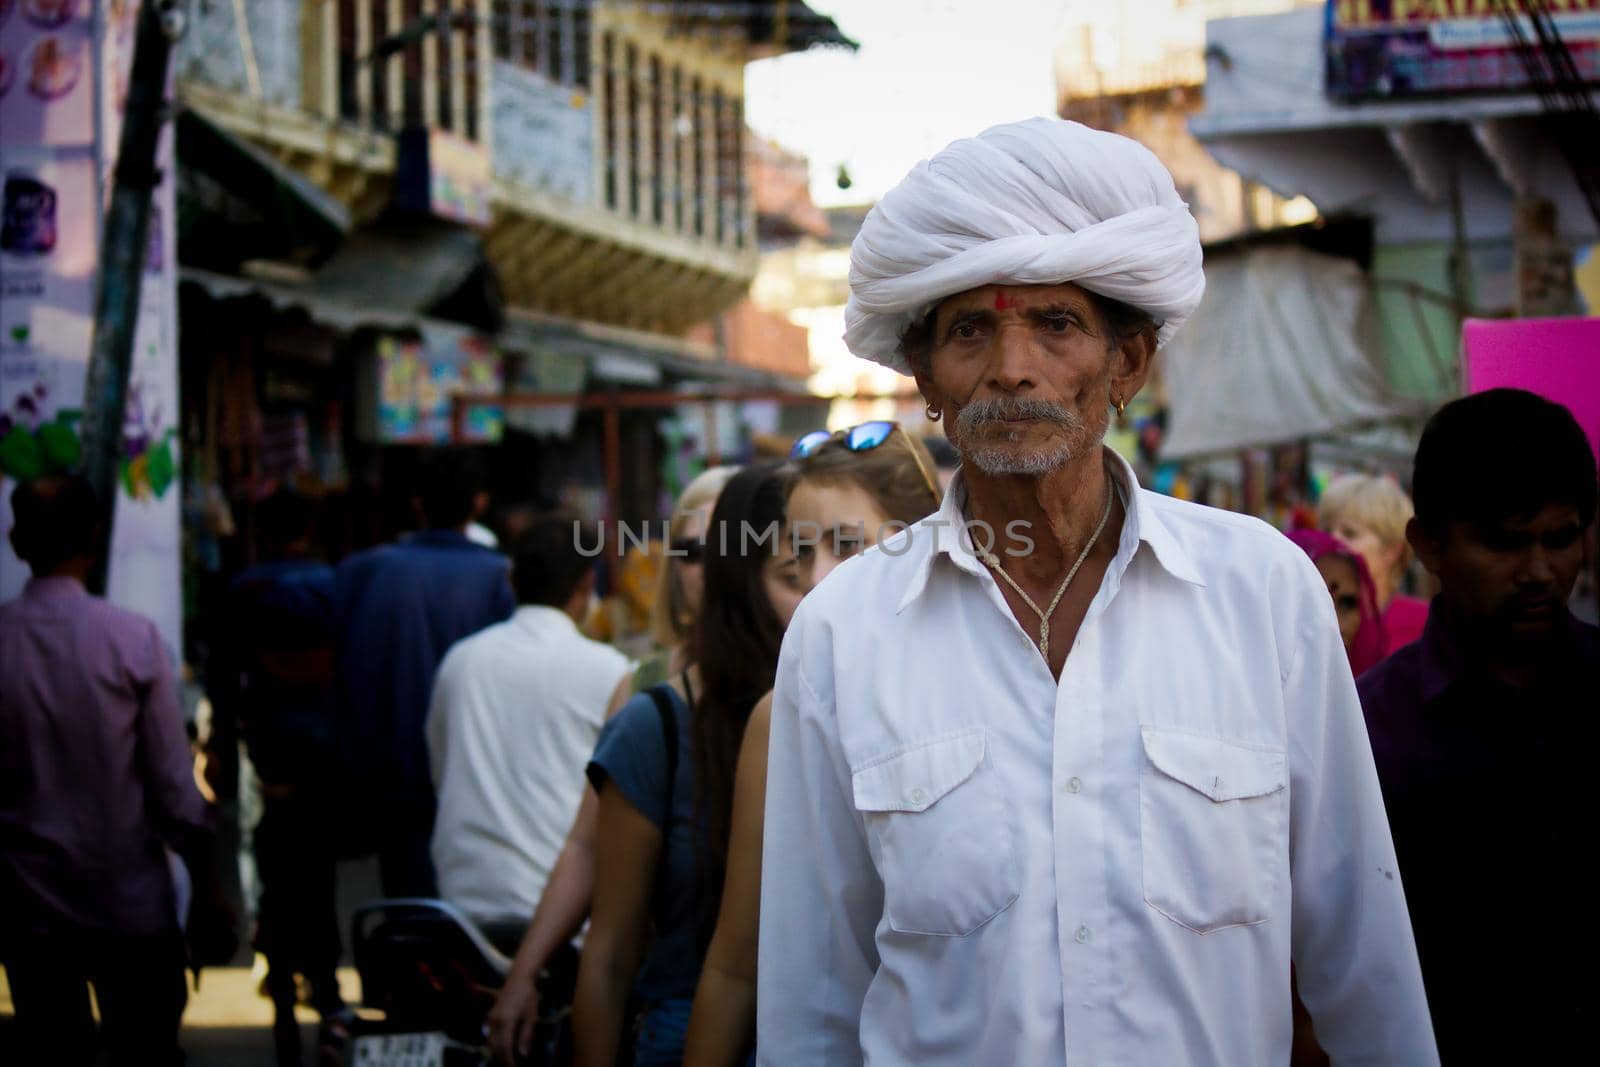 Pushkar, India - November 10, 2016: An old Rajasthani man in traditional ethnic wear such as white turban and typical white kurta walking in a street during pushkar fair in the state of Rajasthan